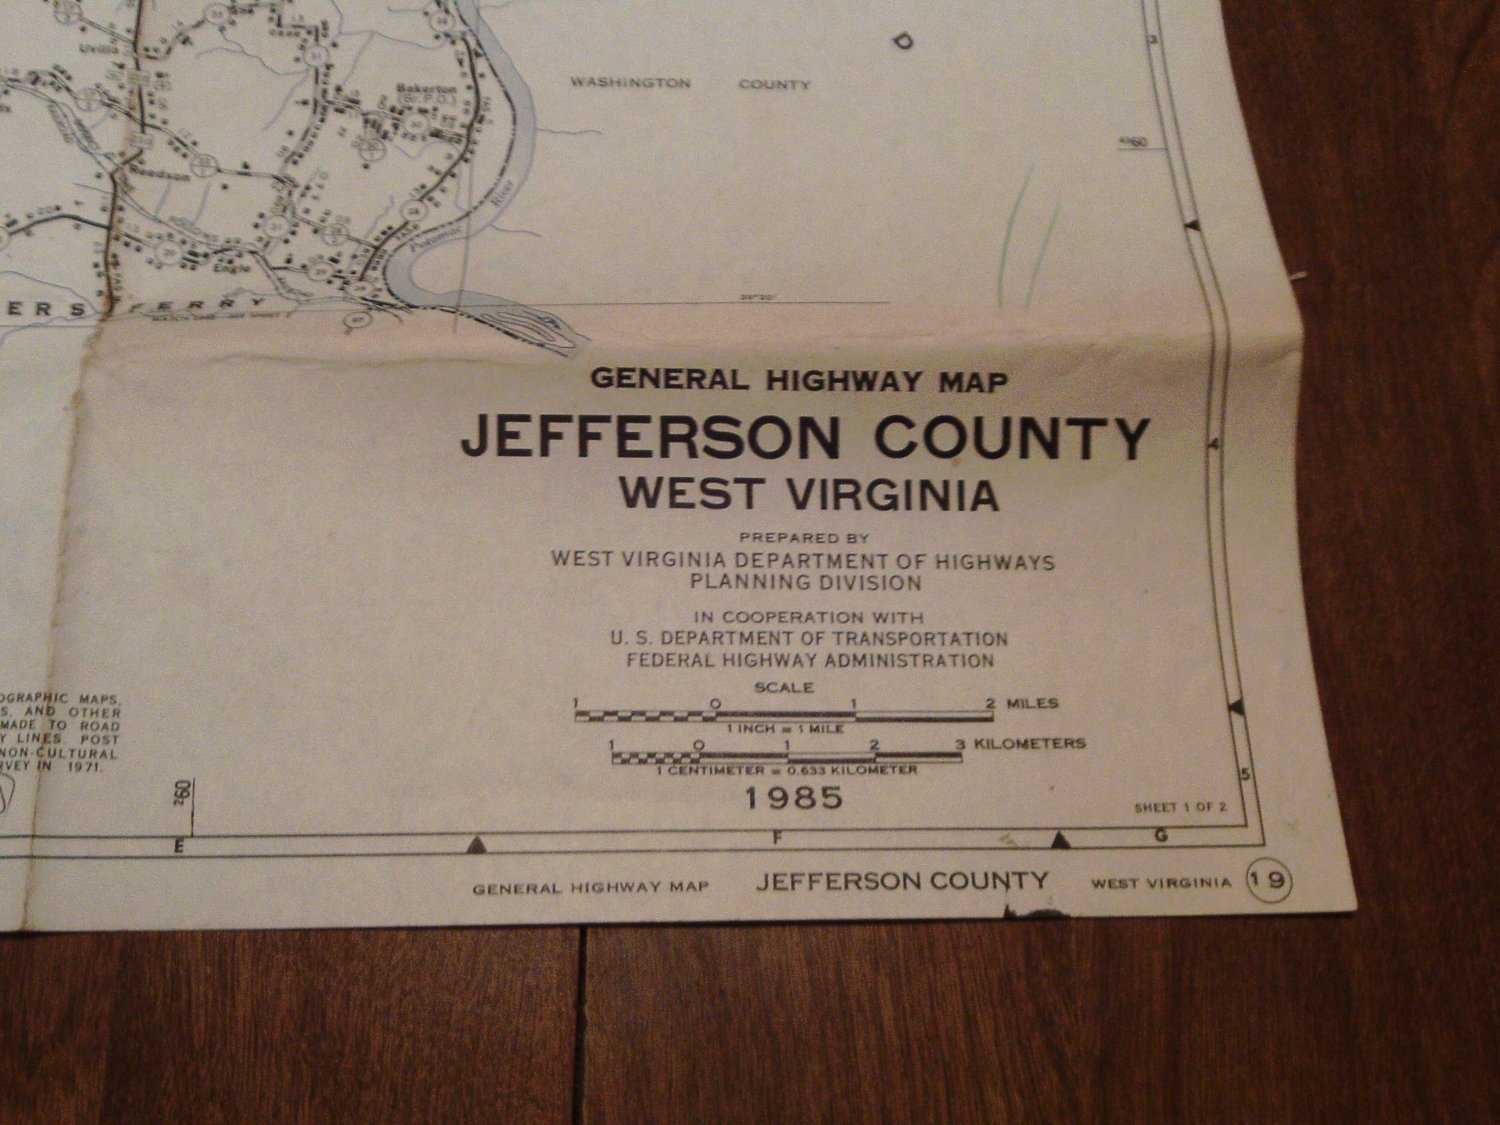 Jefferson County West Virginia General Highway Map 1985 2 Sheet Map 5924